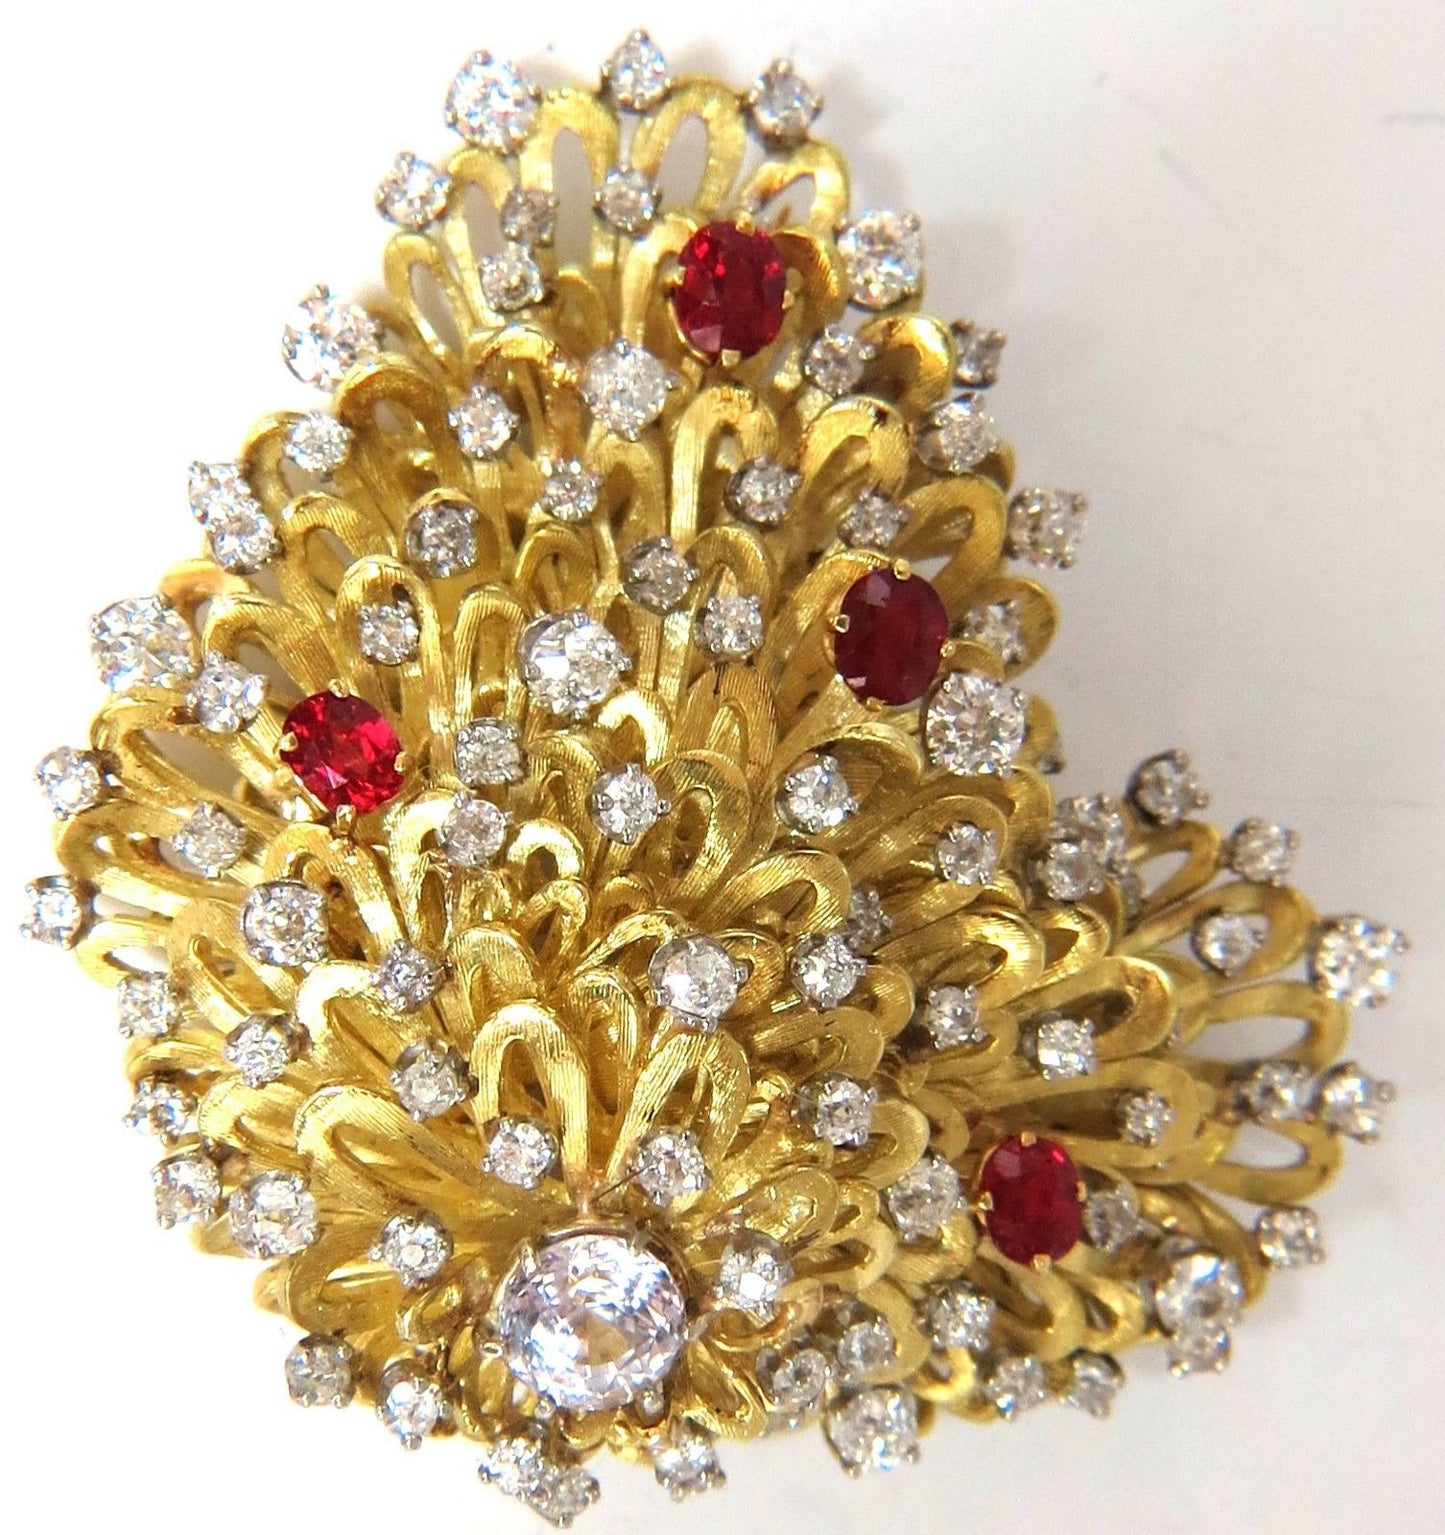 ERWIN PEARL 8.00ct. NATURAL DIAMONDS & RED SPINEL BROOCH PIN 18KT